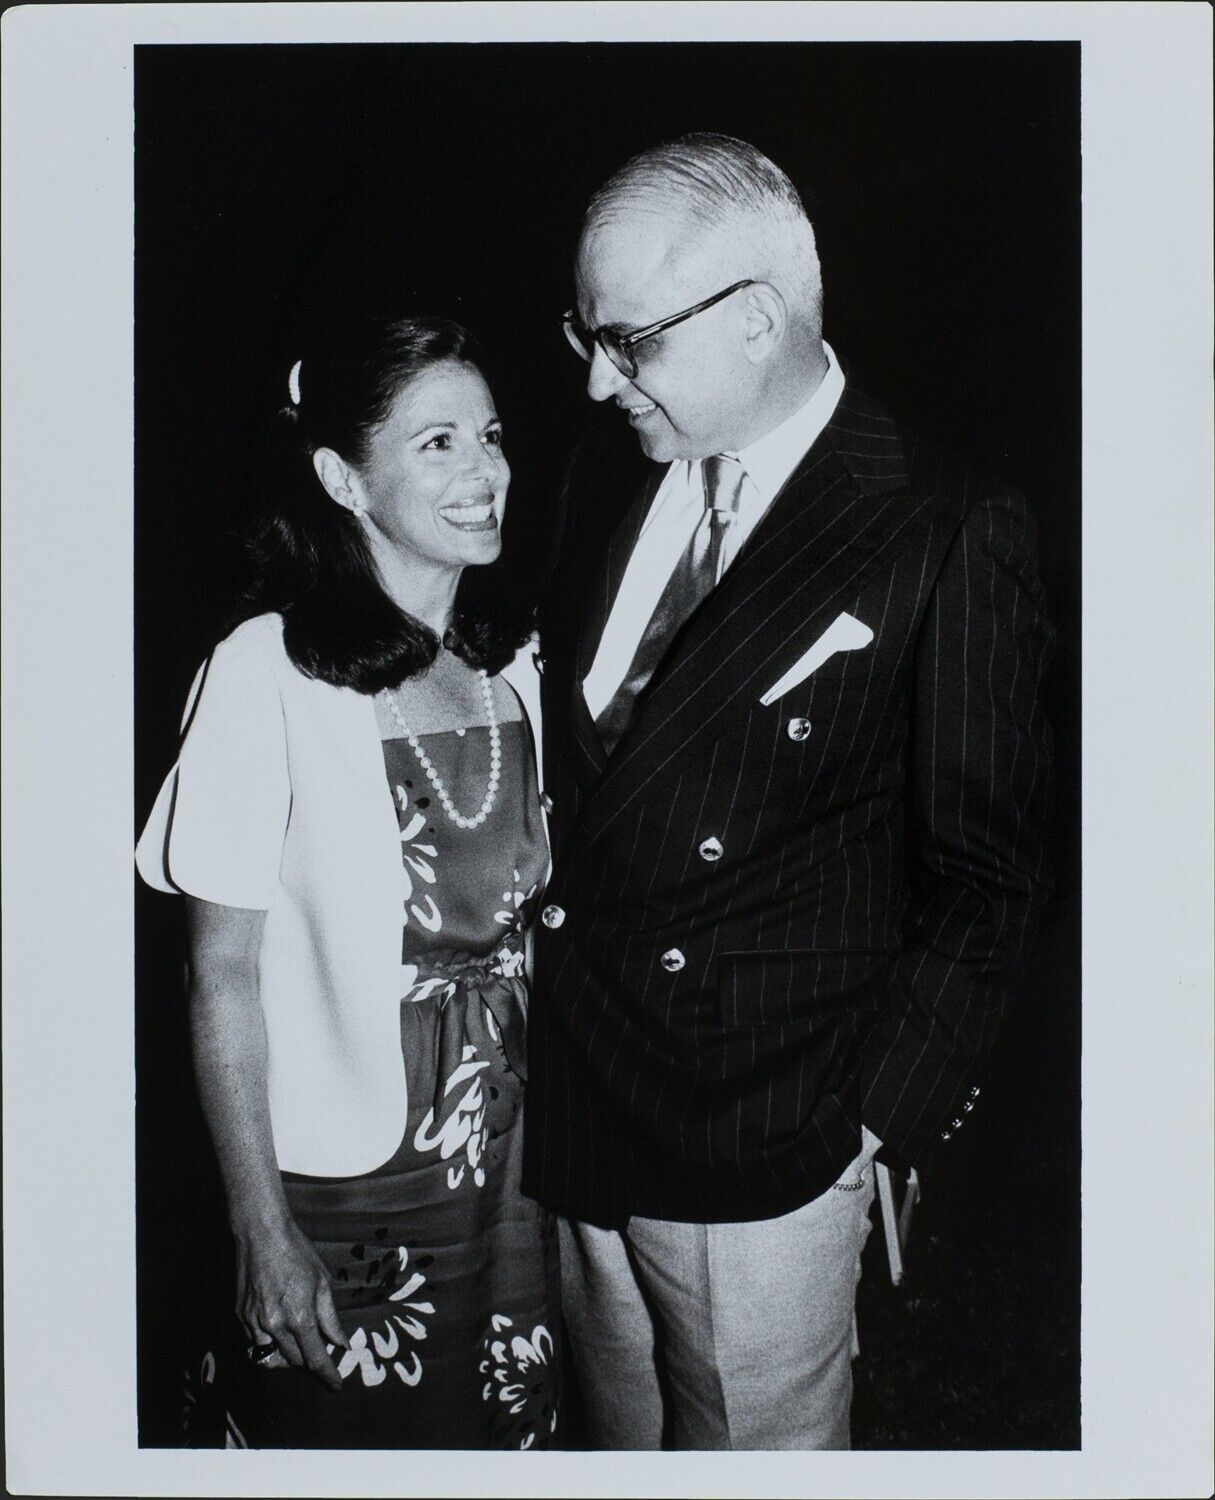 George Christy (Reporter), Stephanie Labbe ORIGINAL PHOTO HOLLYWOOD Candid